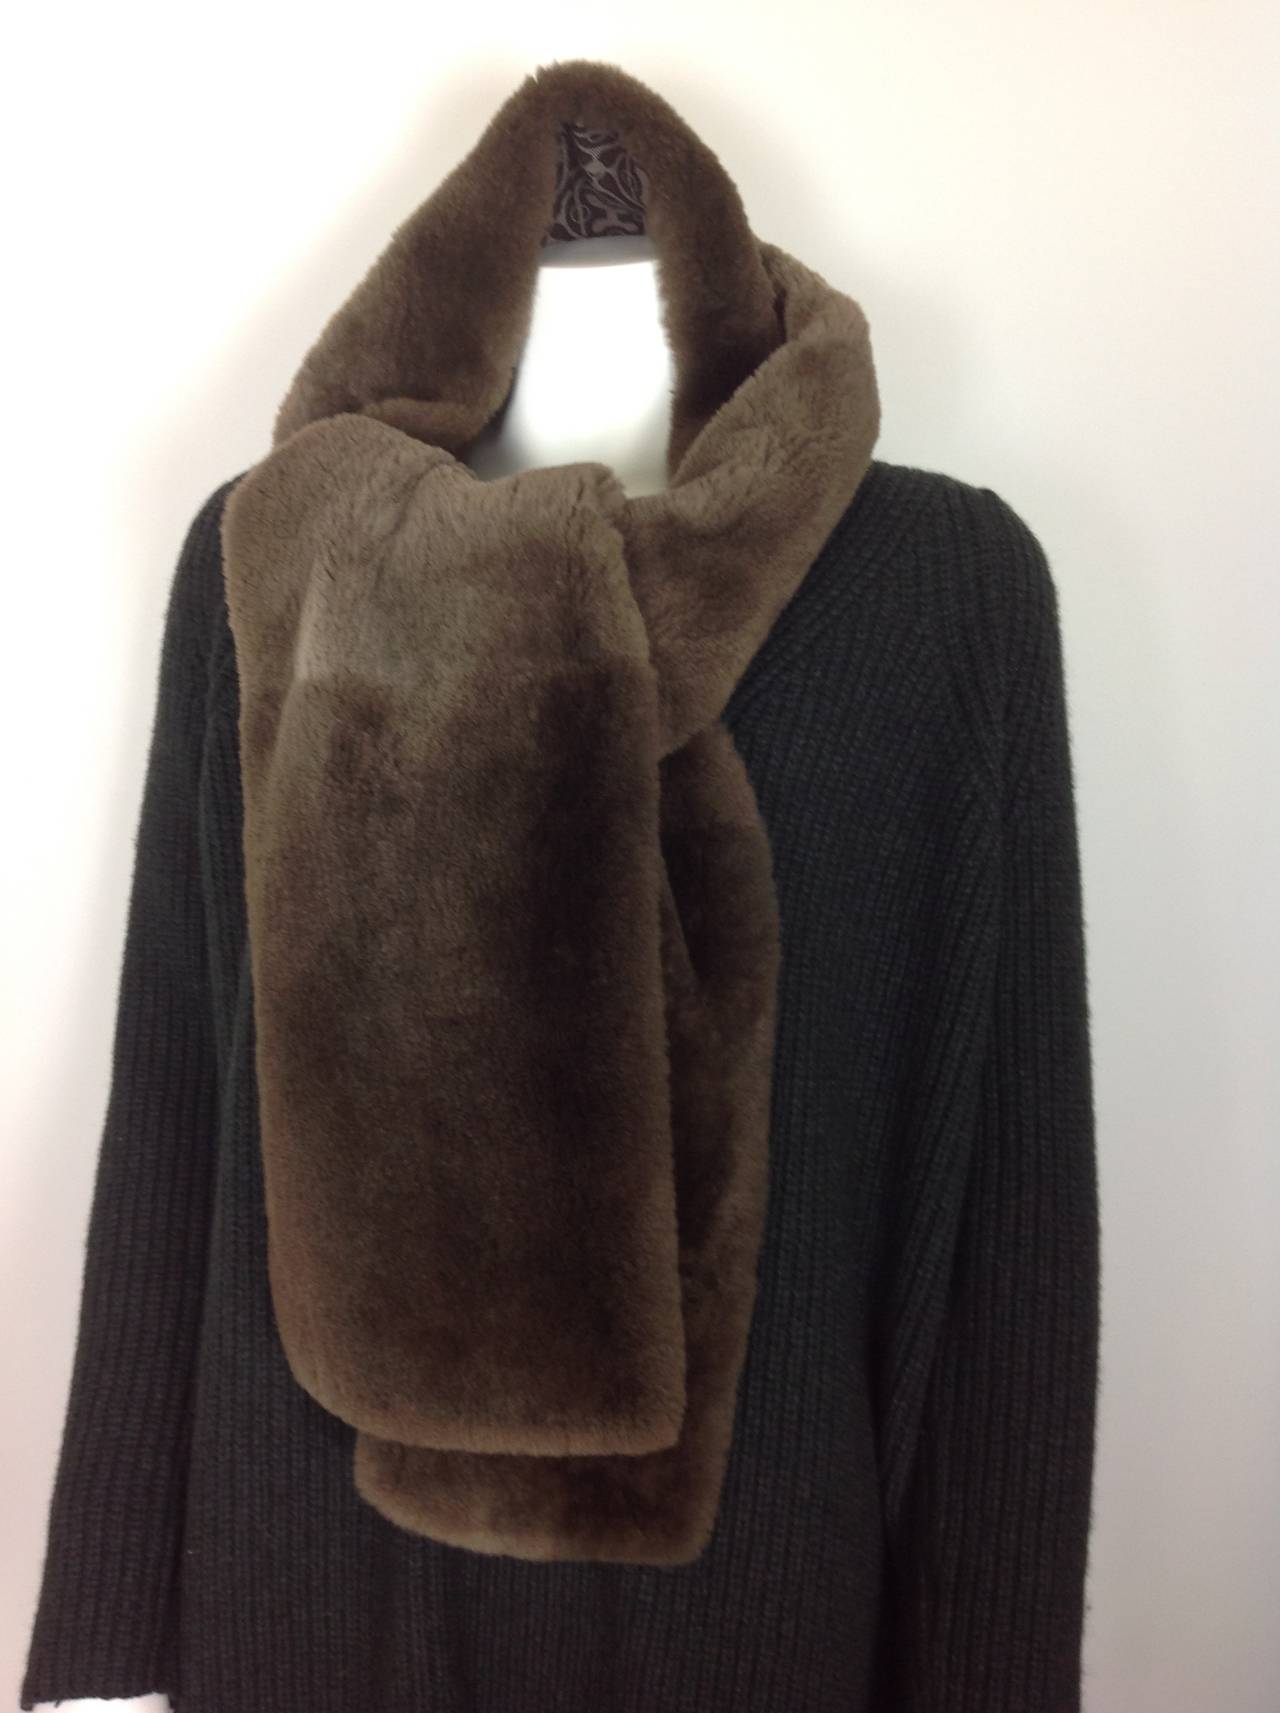 Soft and cuddly Sheared Nutria Hermes muffler.  Will  keep you warm all winter.
Backed in a silk and cashmere blend.  The print is a plummy brown and taupe, herringbone.  Hermes - Paris 2